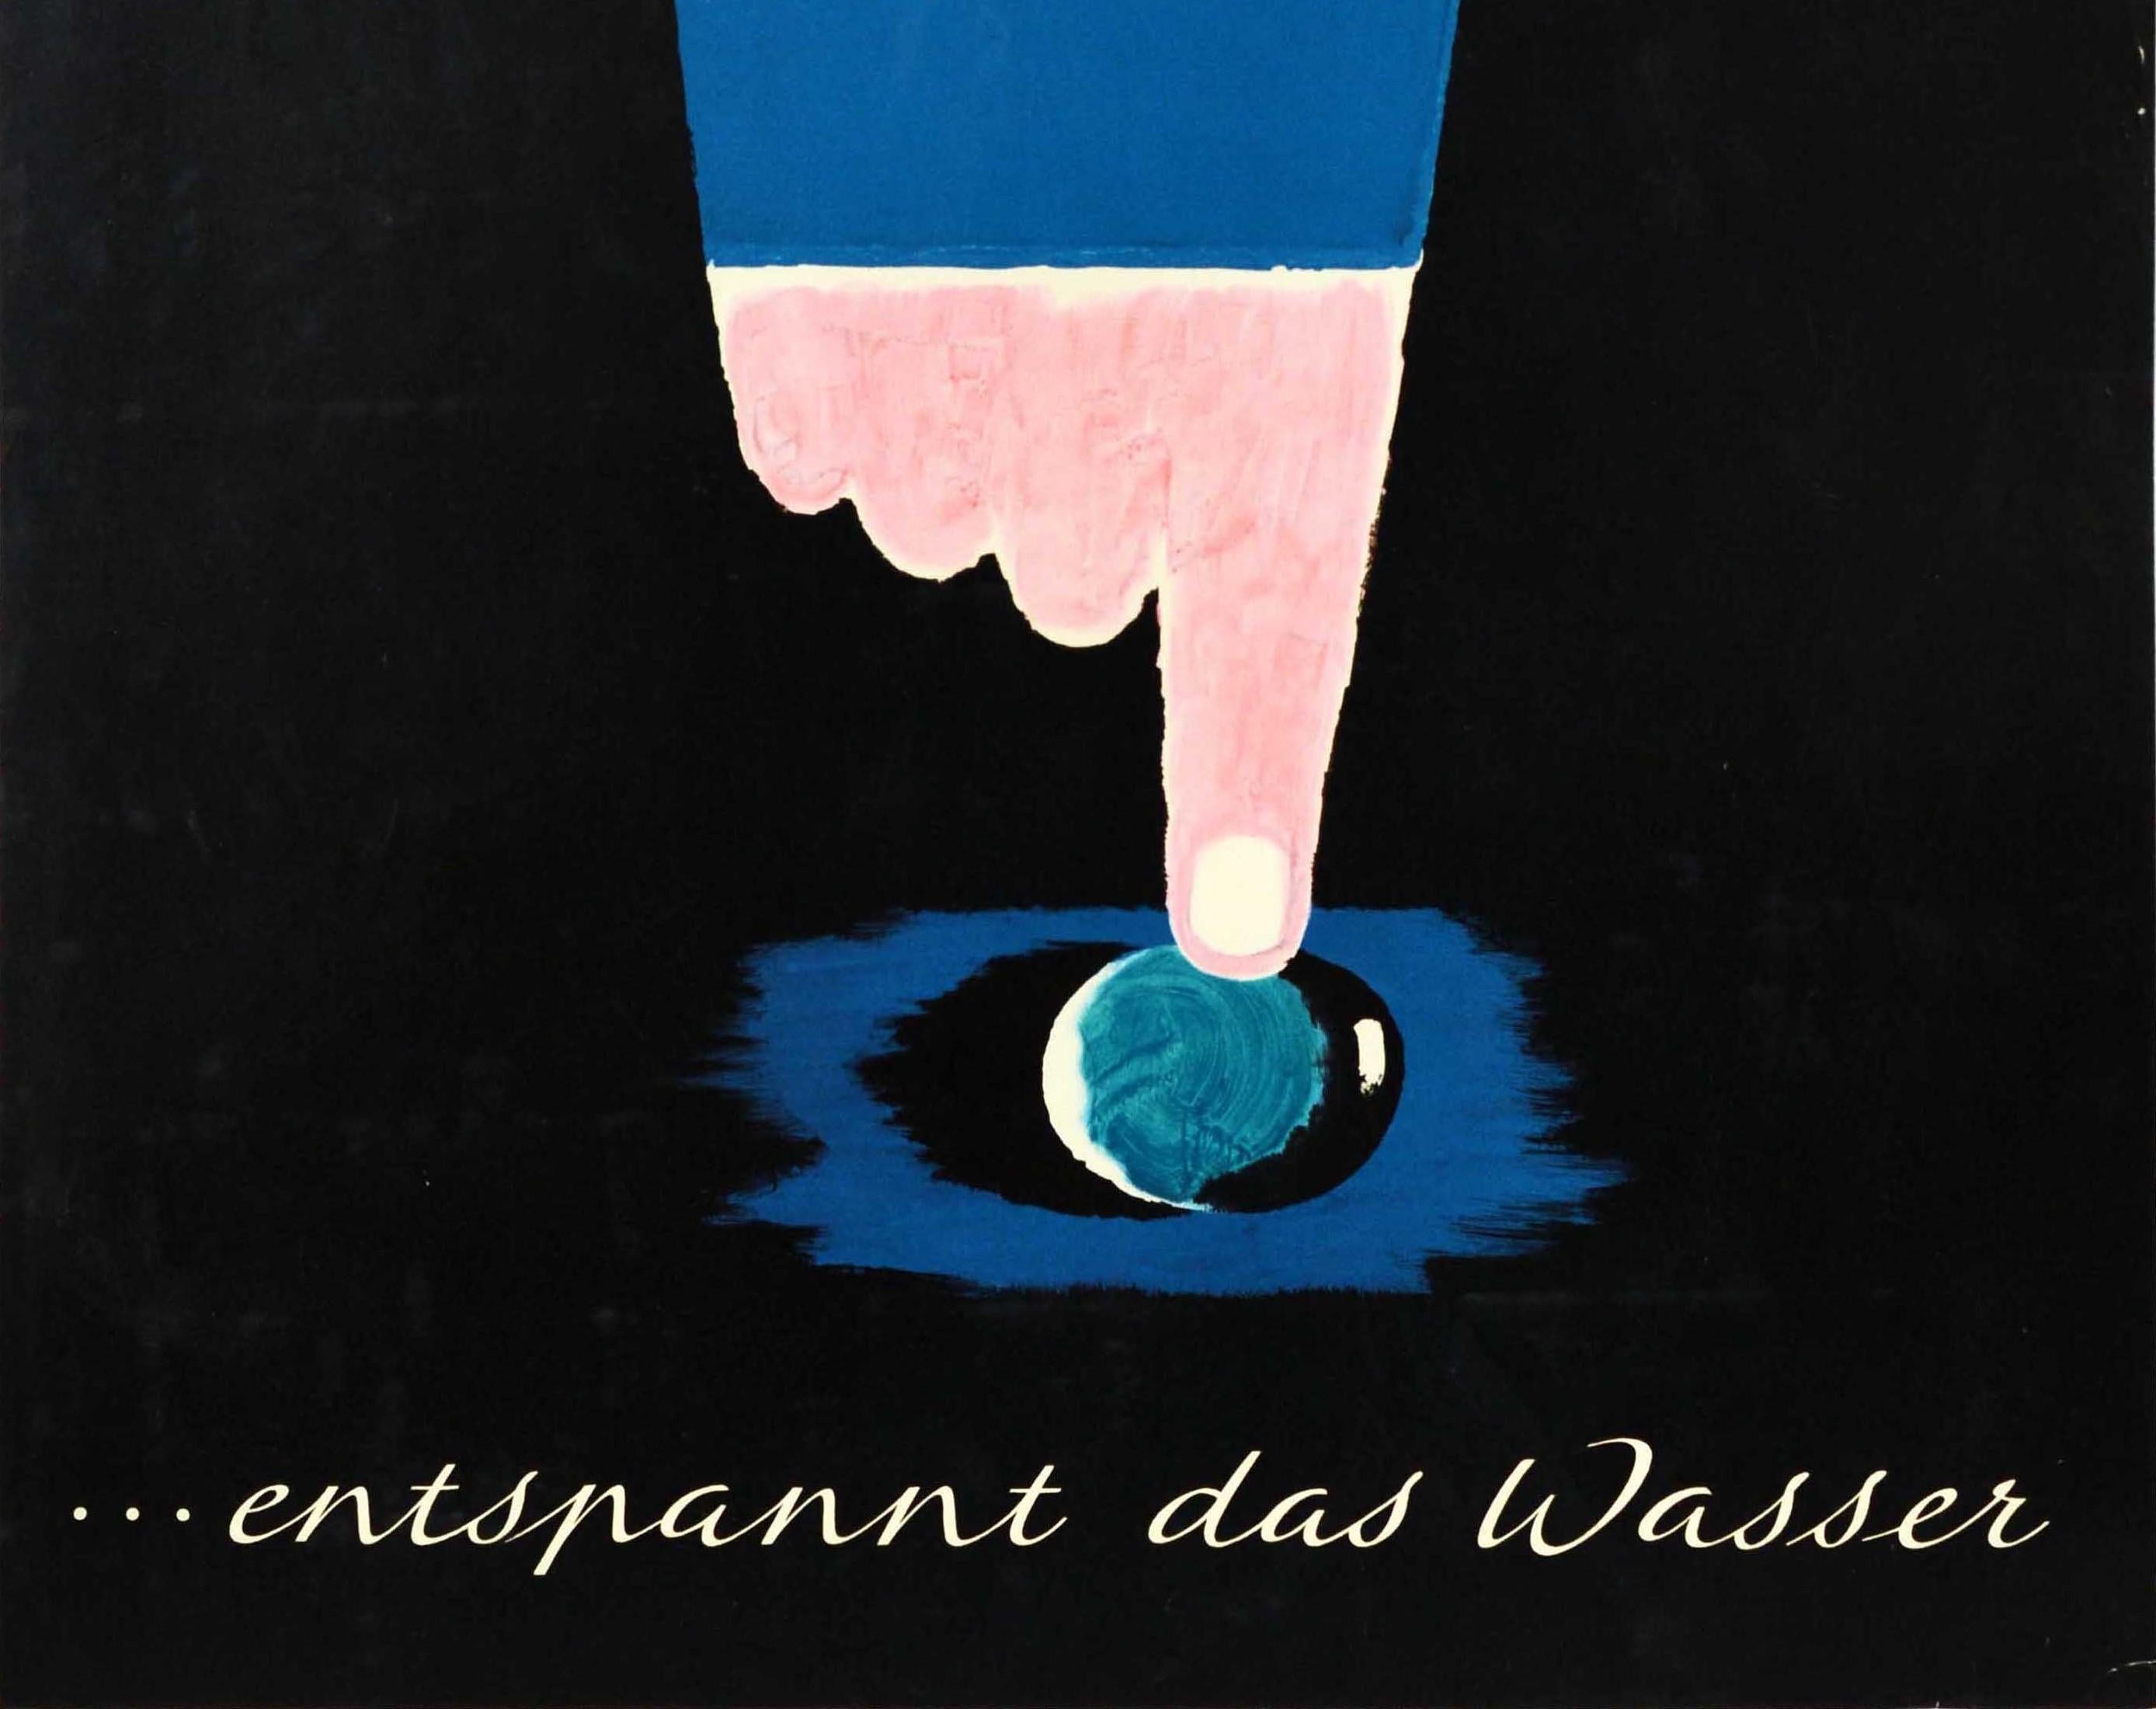 German Original Vintage Advertising Poster For Pril Washing Up Powder Relaxes The Water For Sale